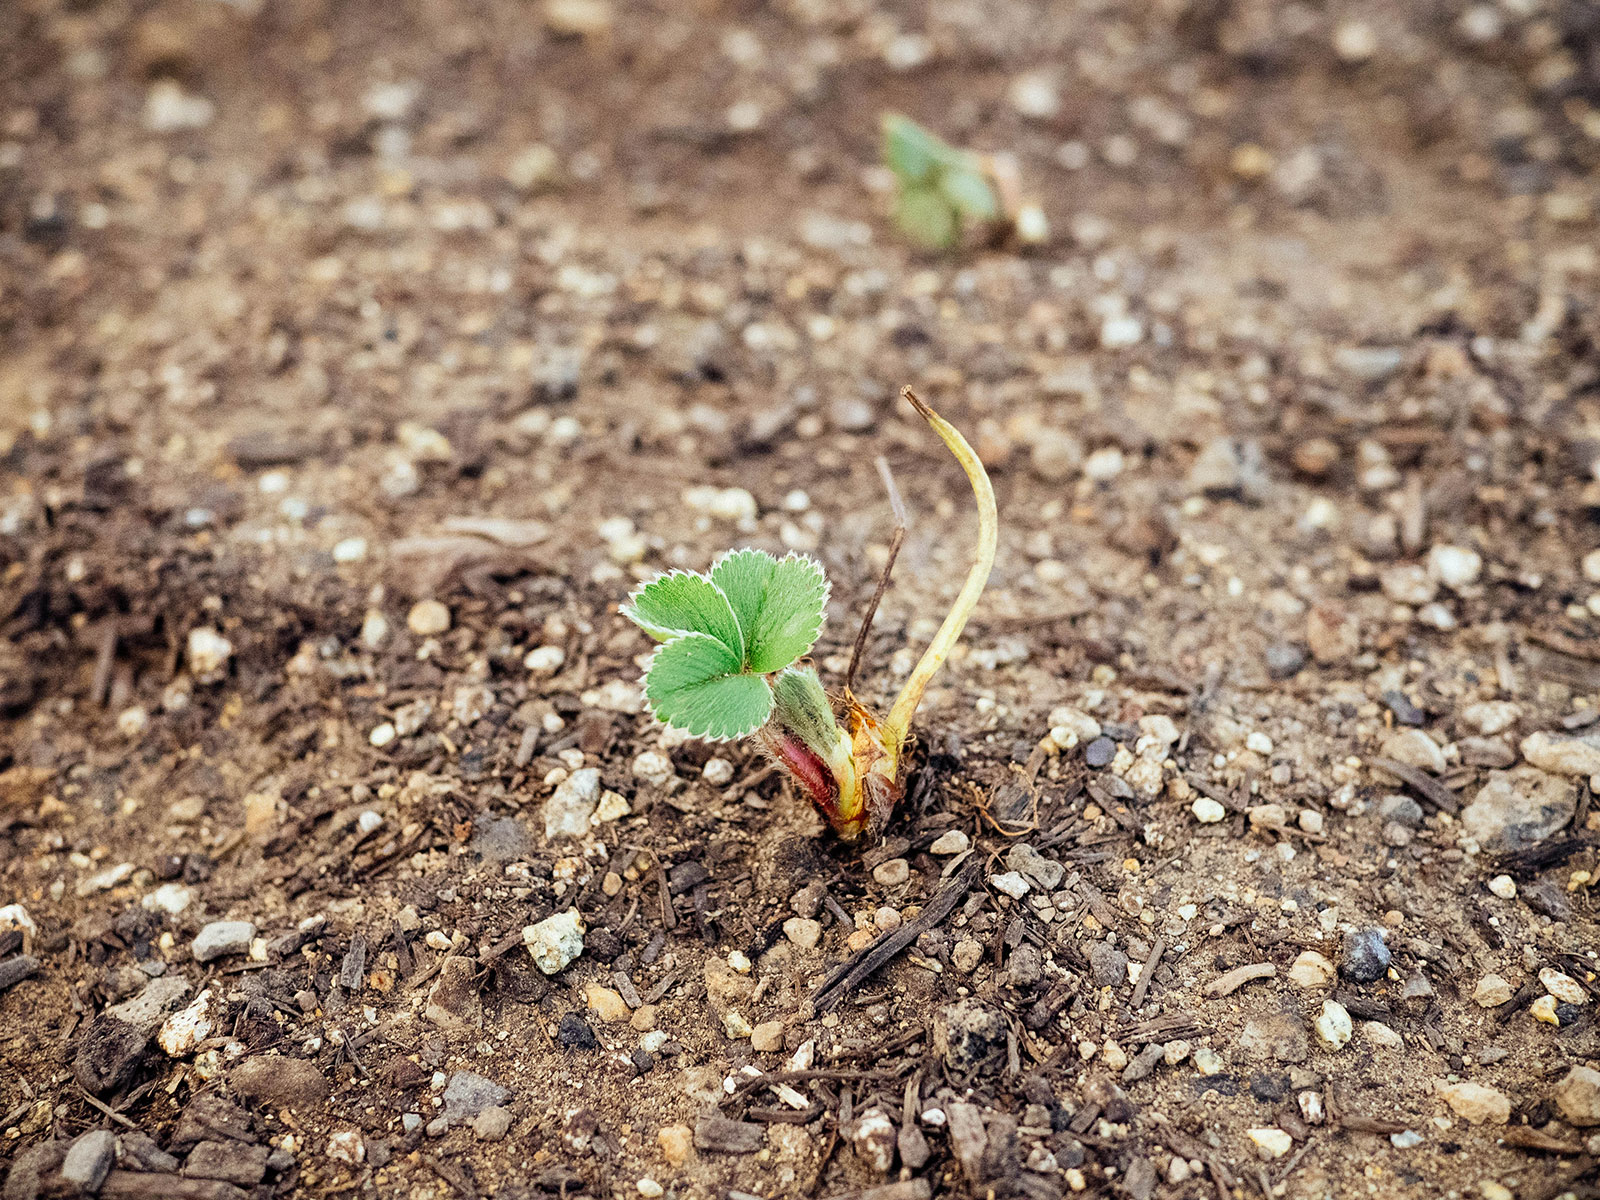 A newly planted strawberry crown with new spring growth